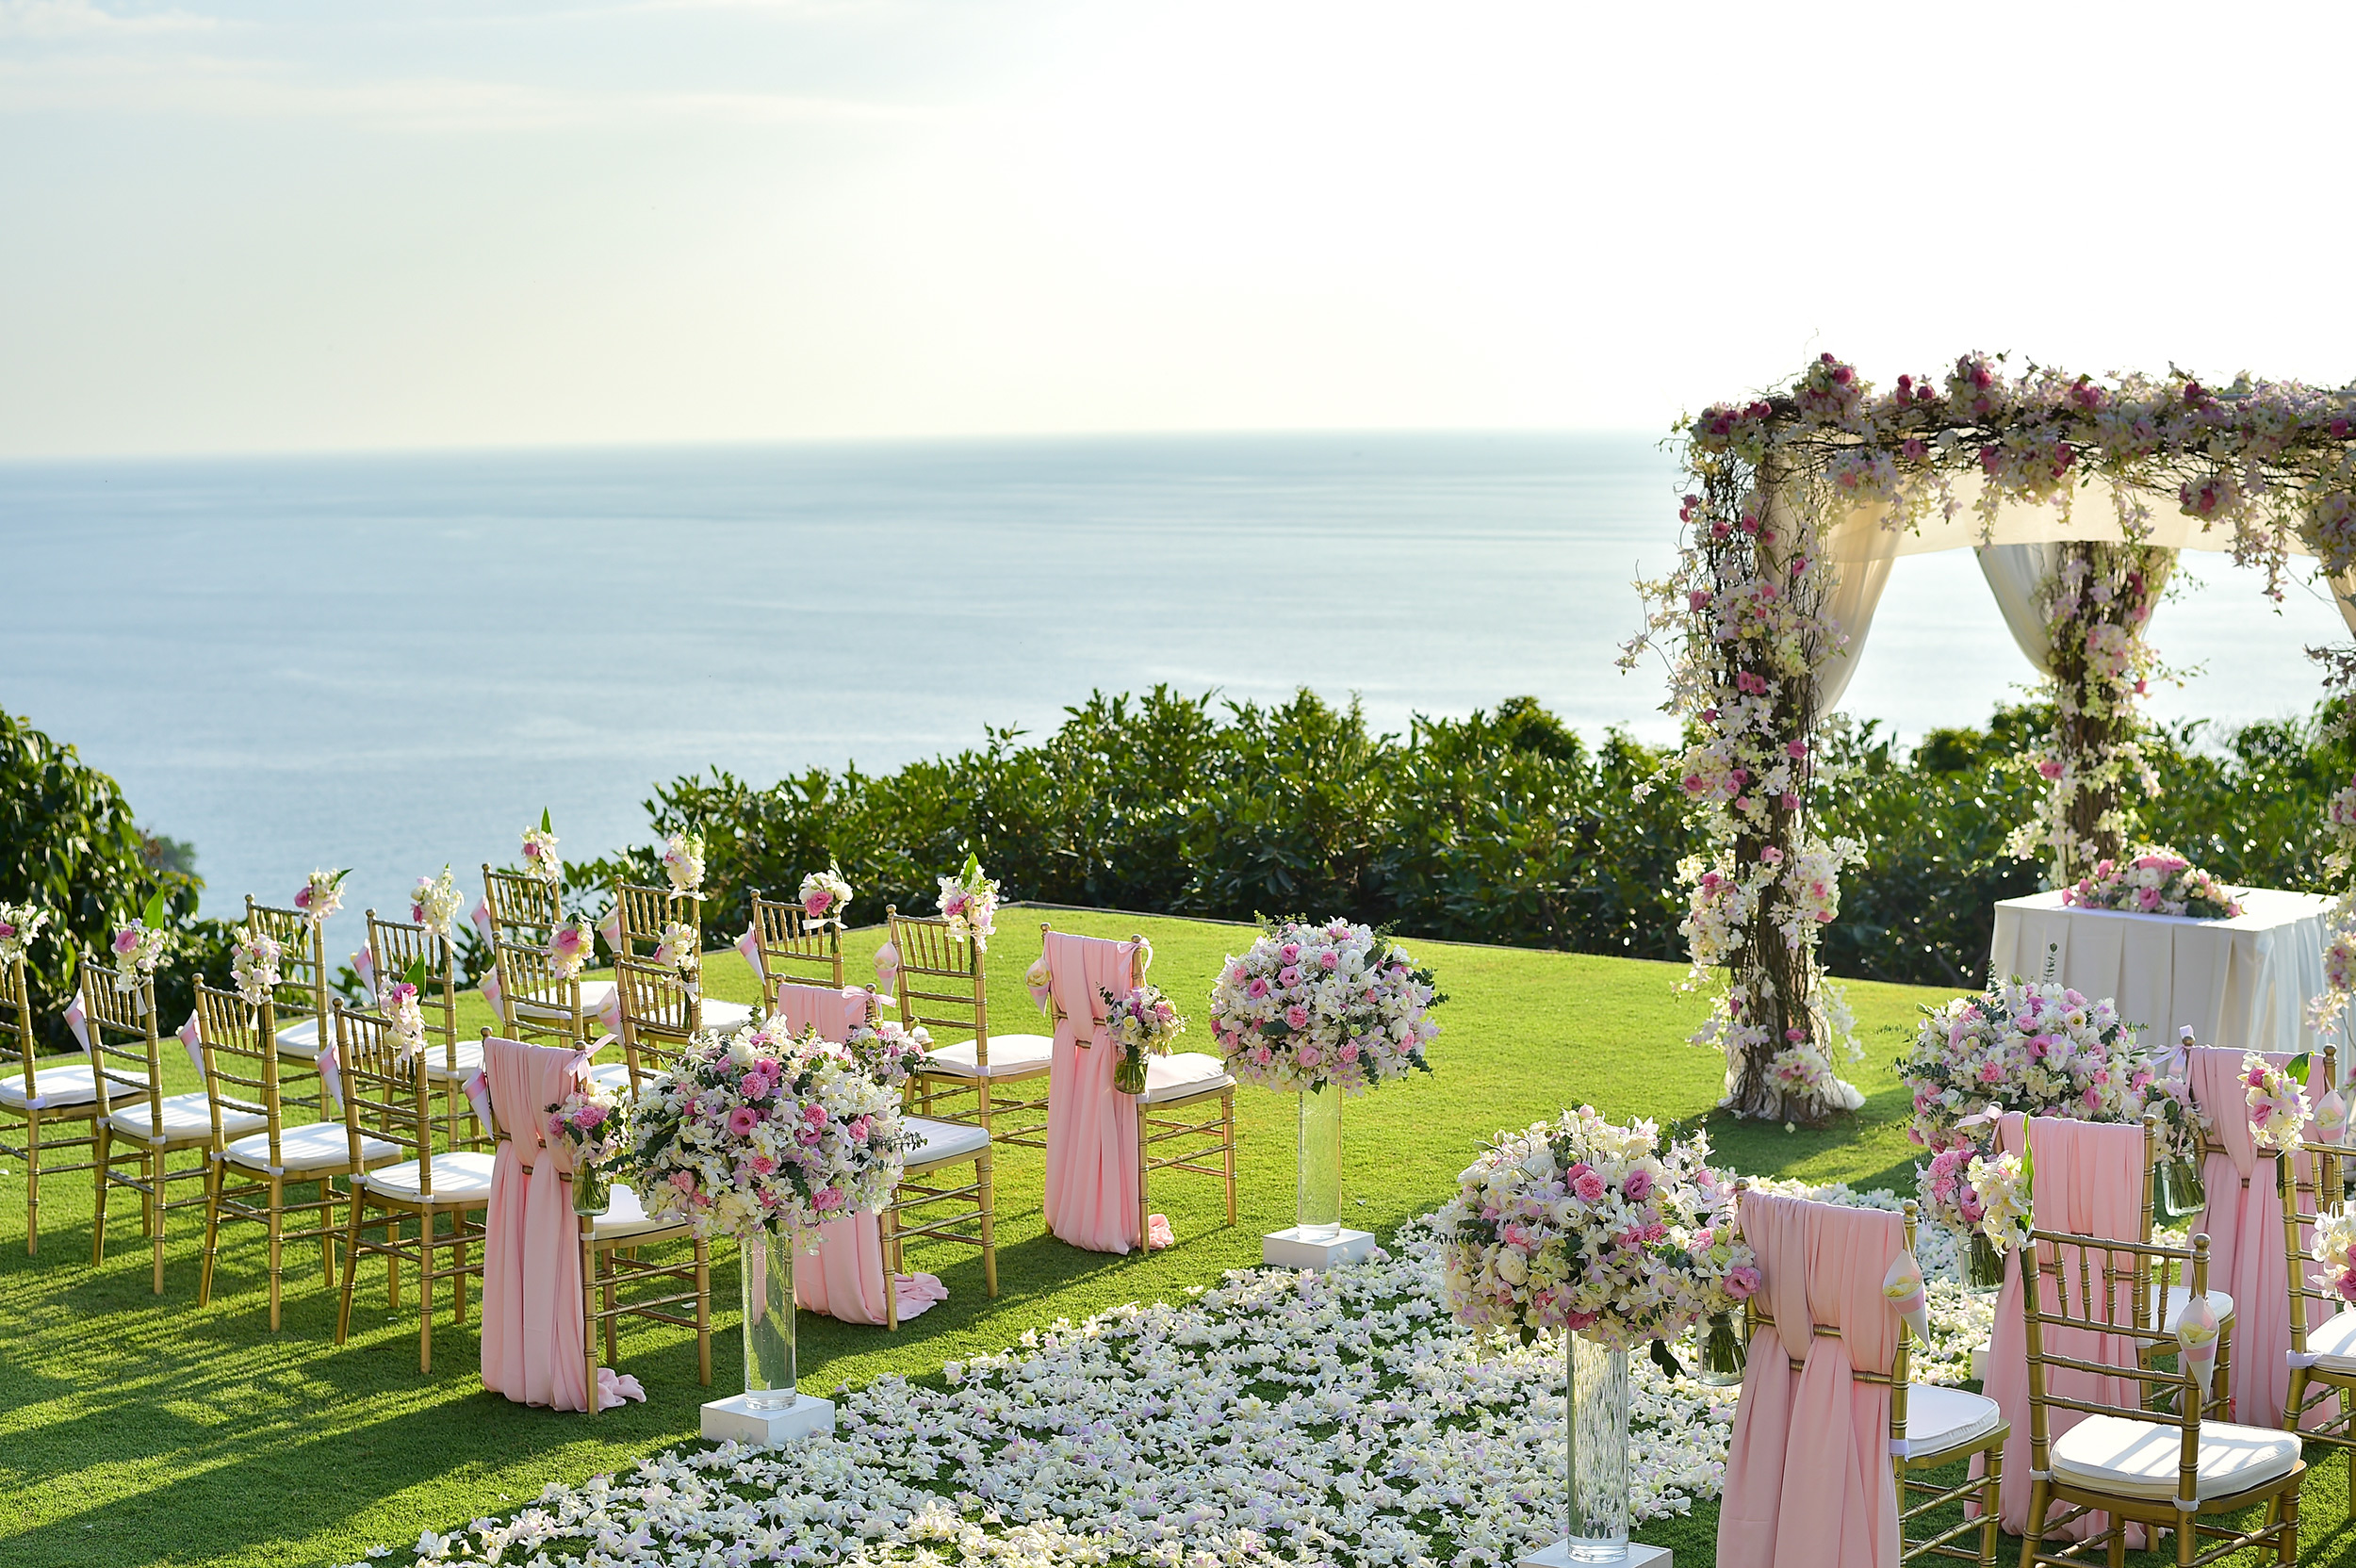 Plan Your Destination Wedding and Make it a Reality